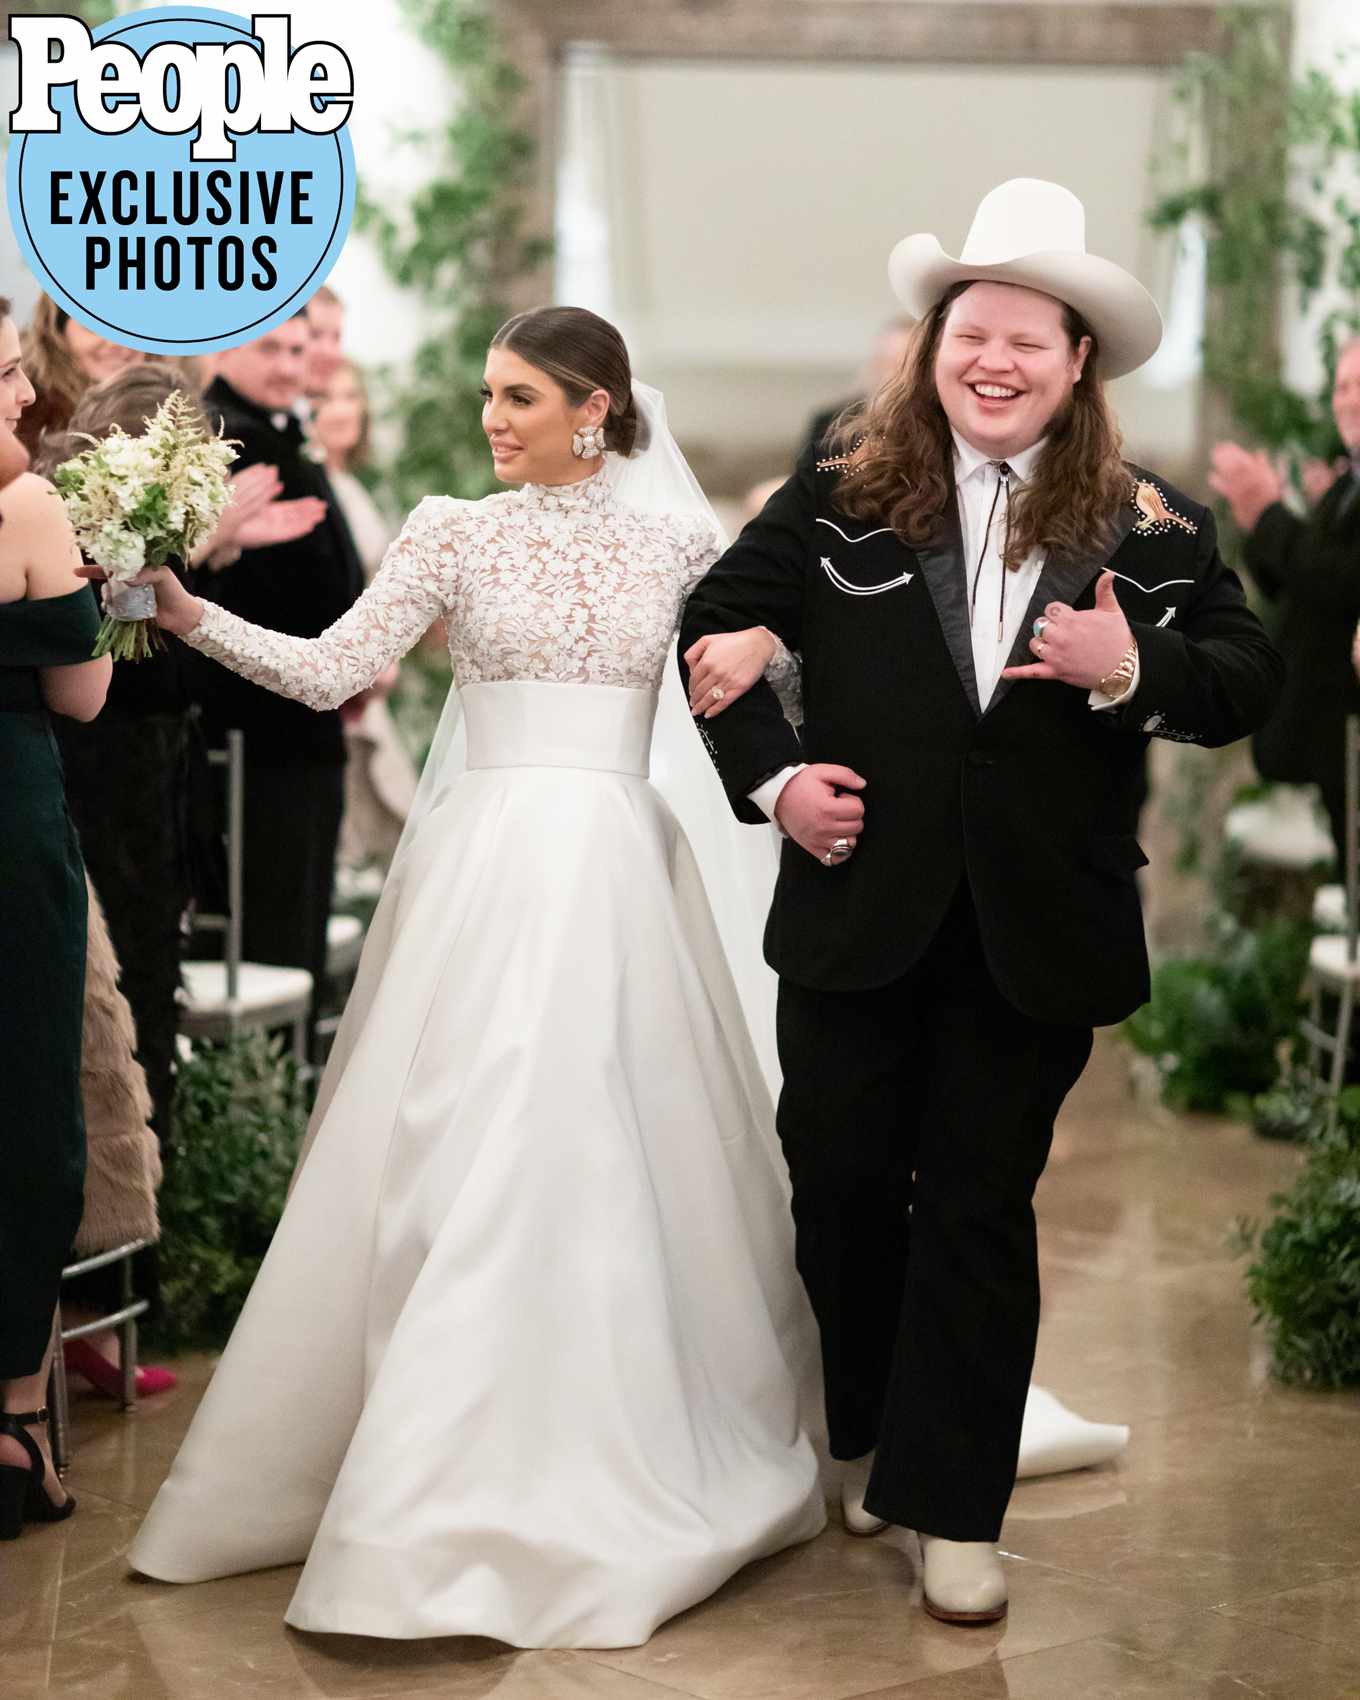 Country Rocker Marcus King Marries Briley Hussey See Wedding Photos